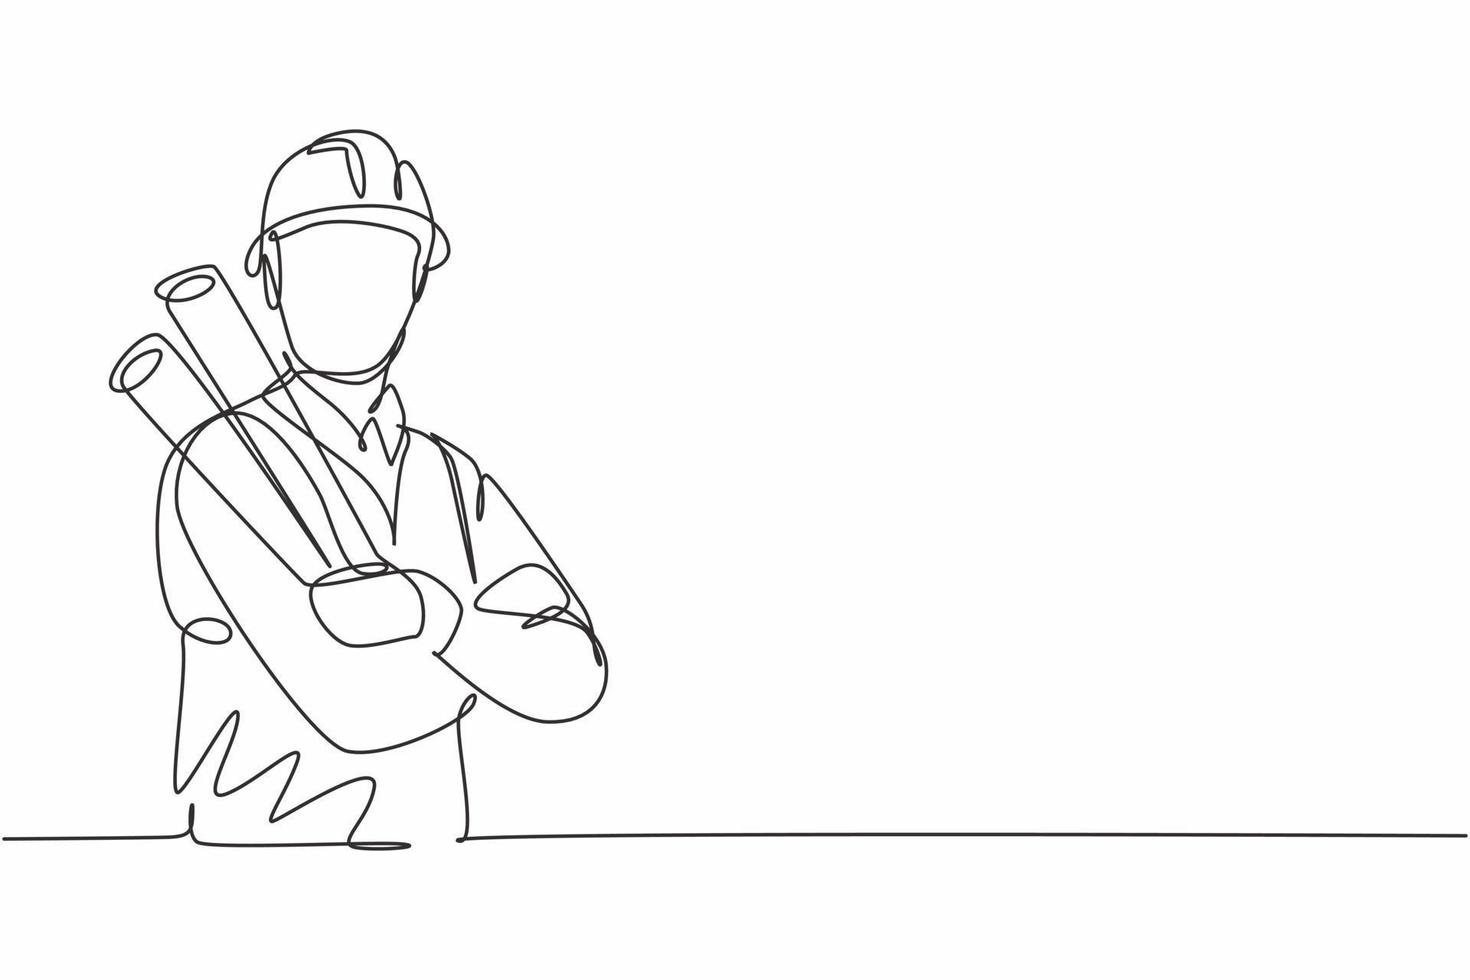 Single one line drawing young male architect cross arm on chest hold blueprint paper. Professional work profession occupation minimal concept. Continuous line draw design graphic vector illustration